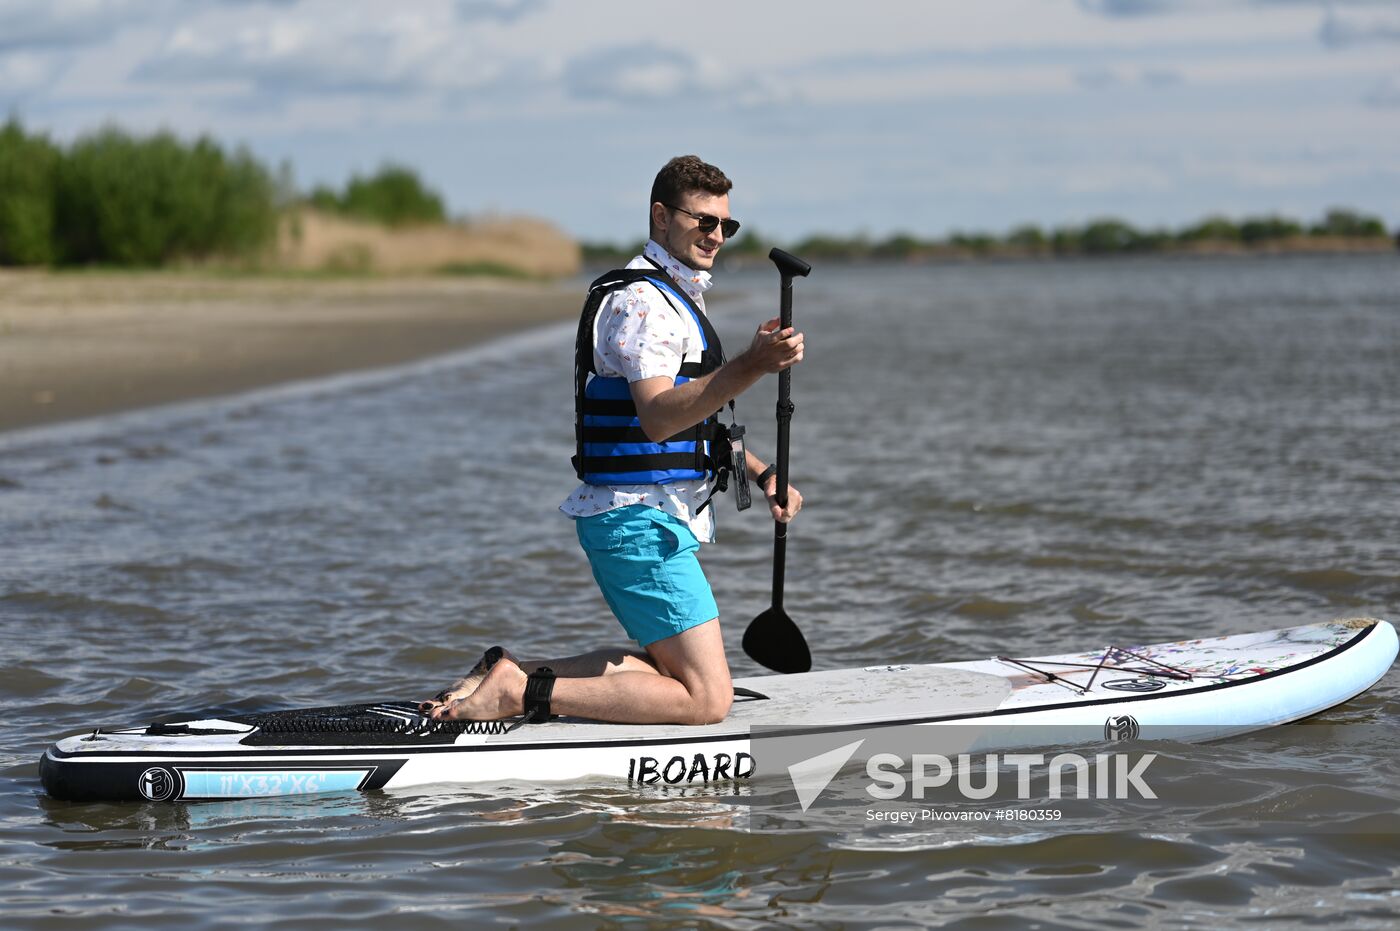 Russia SUP Surfing